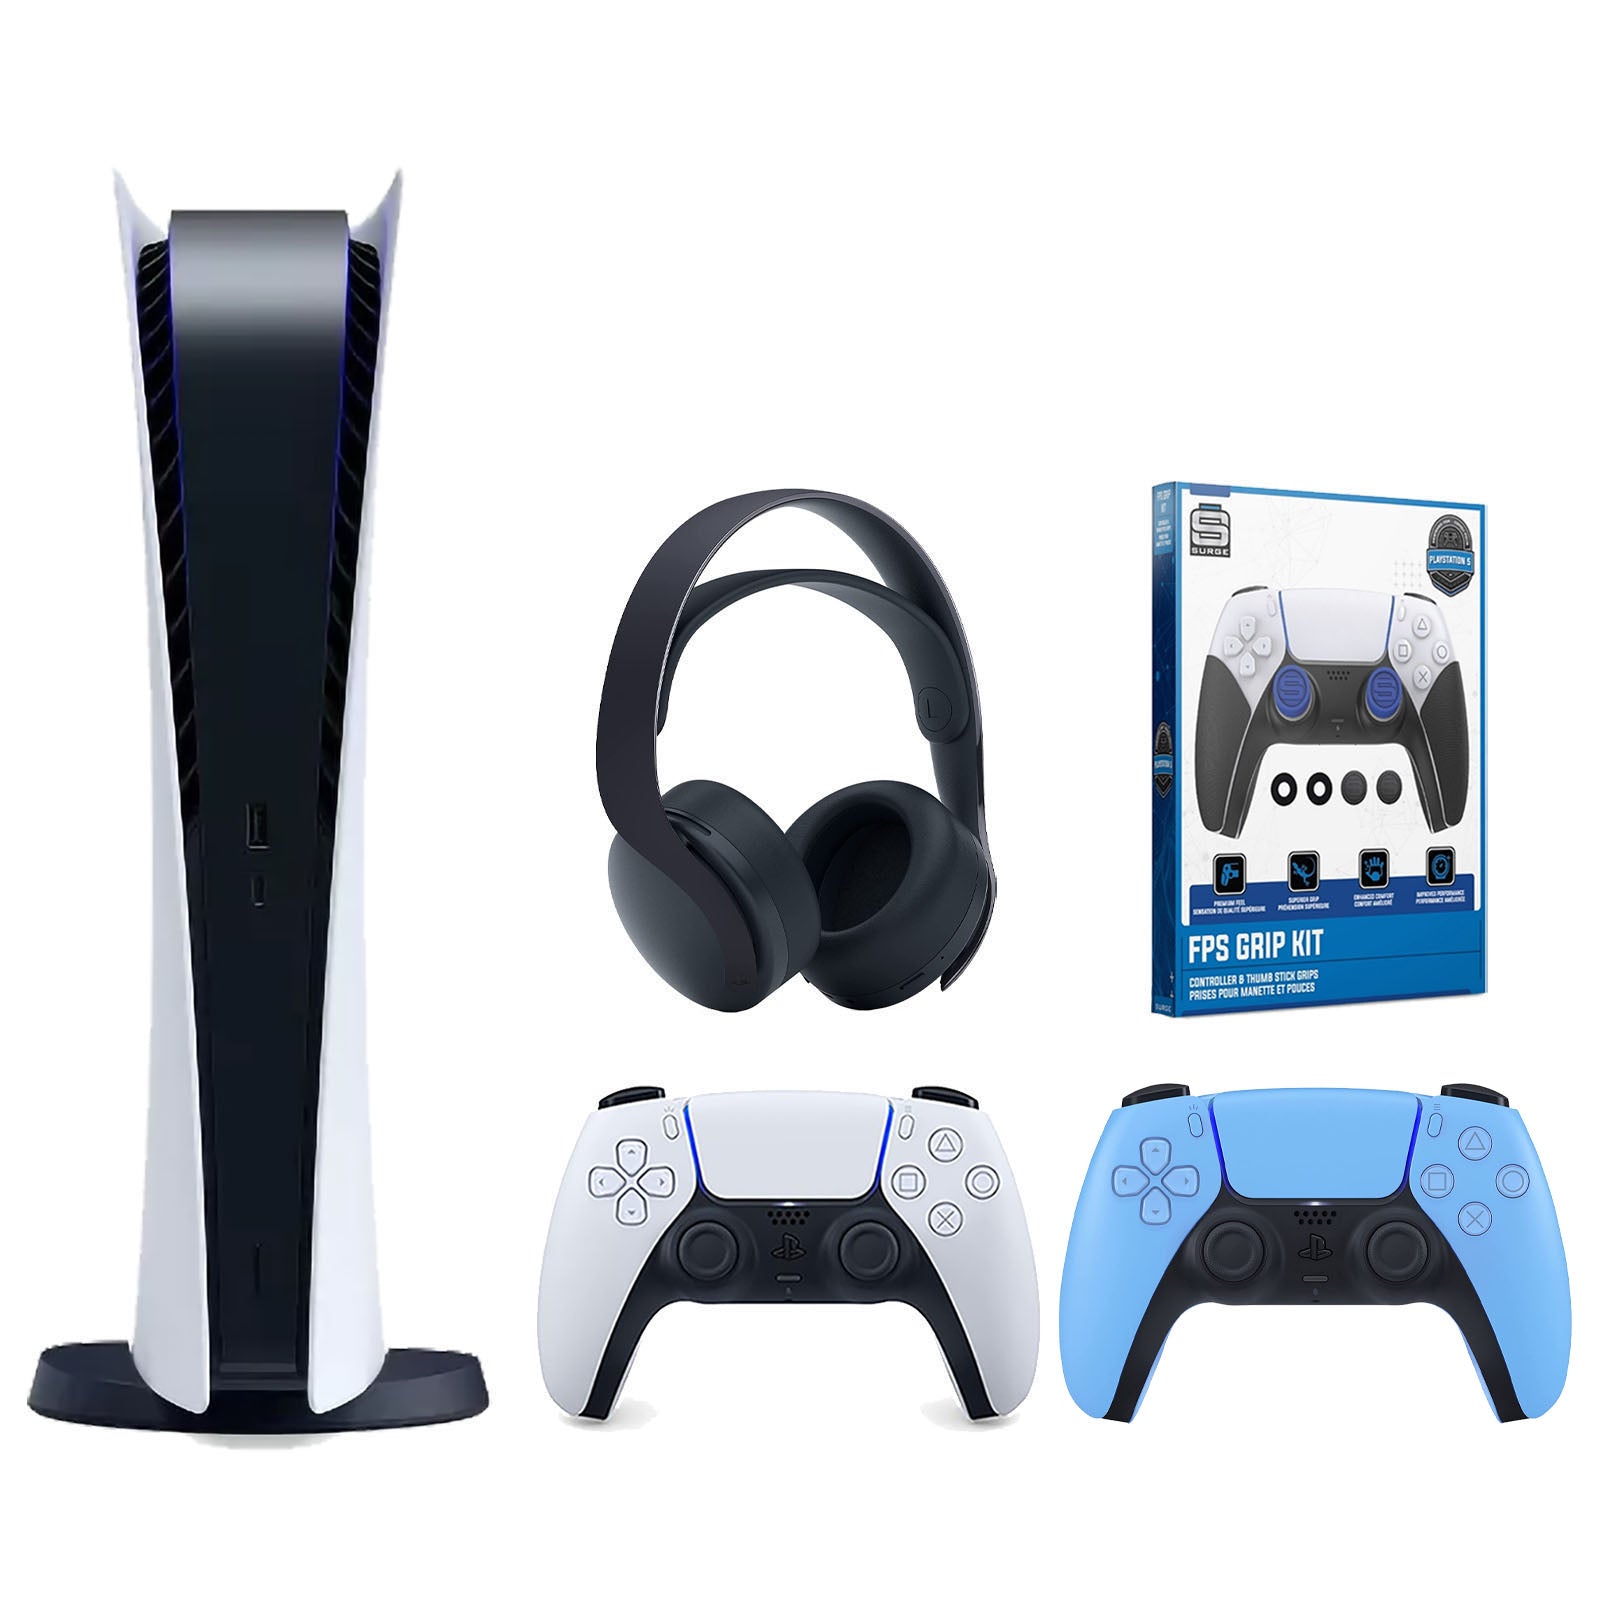 Sony Playstation 5 Digital Edition Console with Extra Blue Controller, Black PULSE 3D Headset and Surge FPS Grip Kit With Precision Aiming Rings Bundle - Pro-Distributing